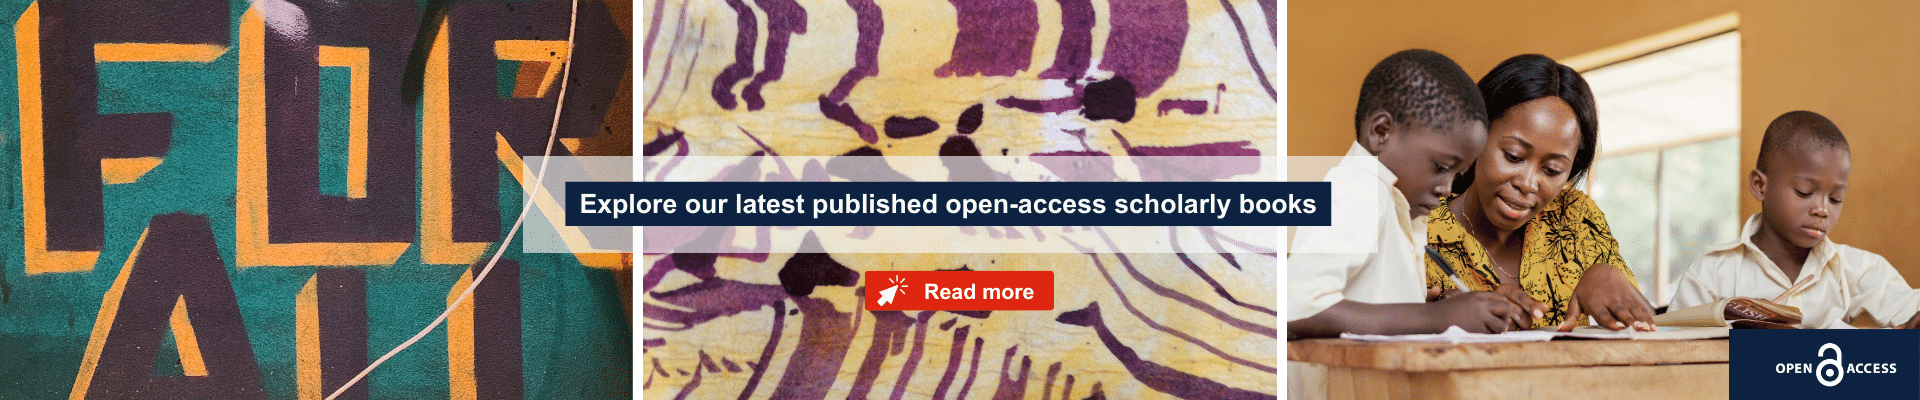 Latest open-access scholarly books